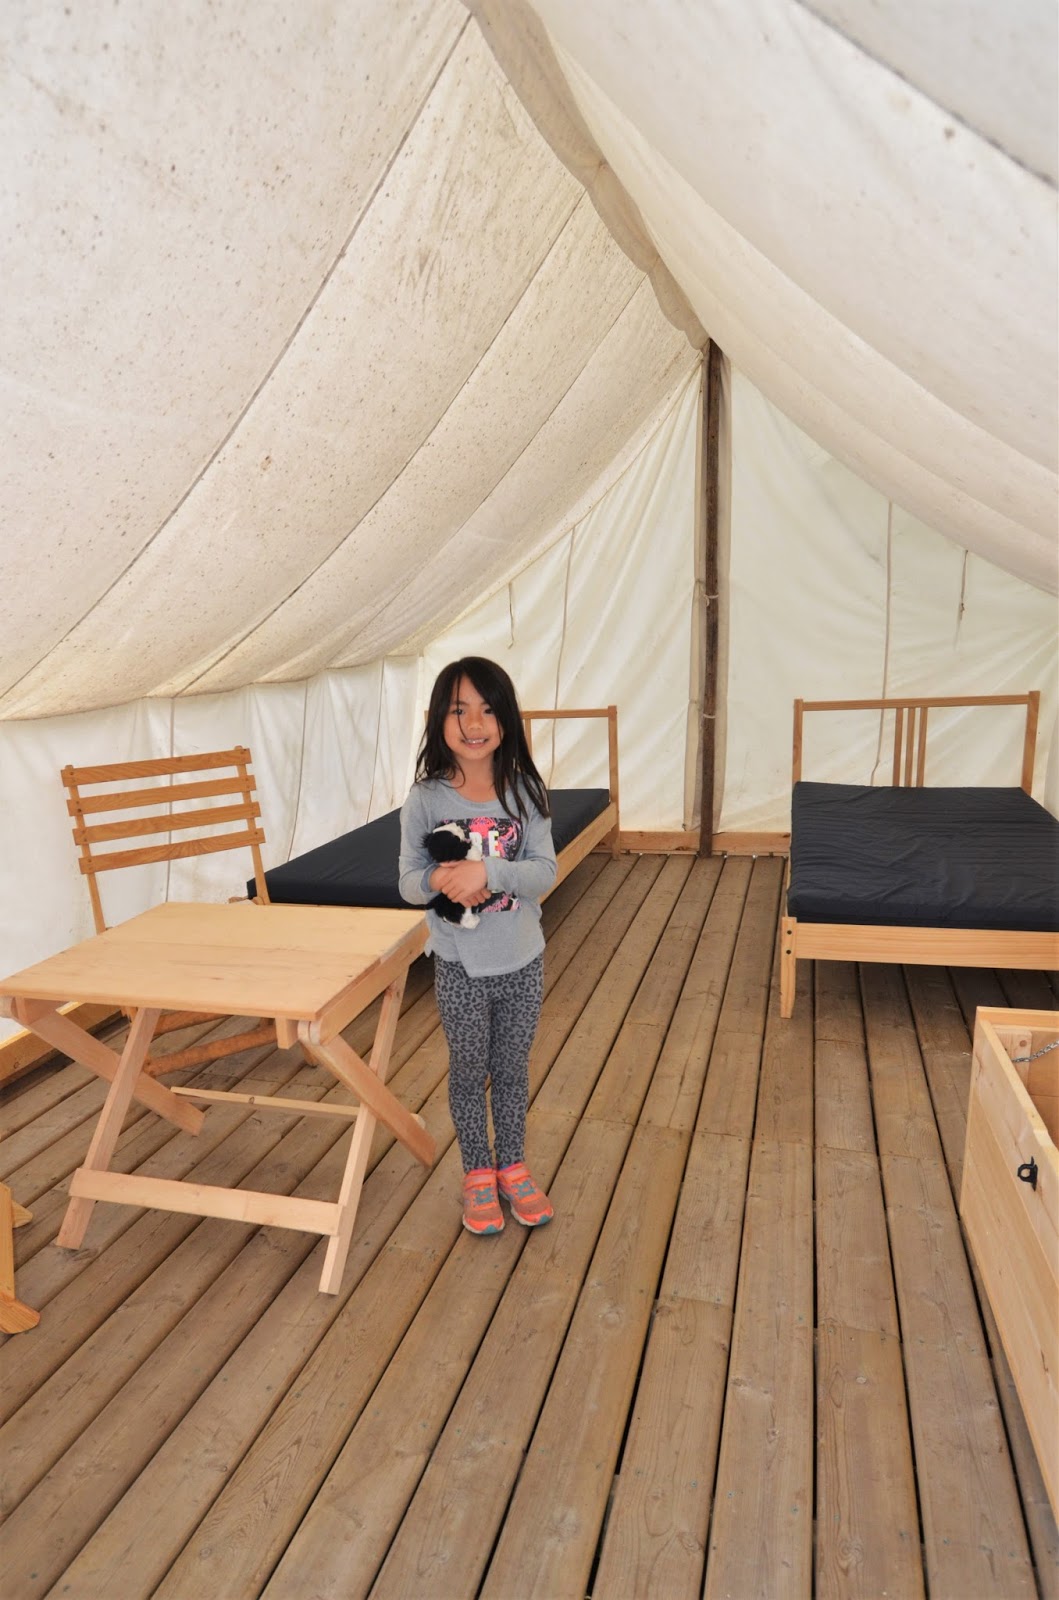 Rocky-mountain-house-national-historic-site-trappers-tent-3